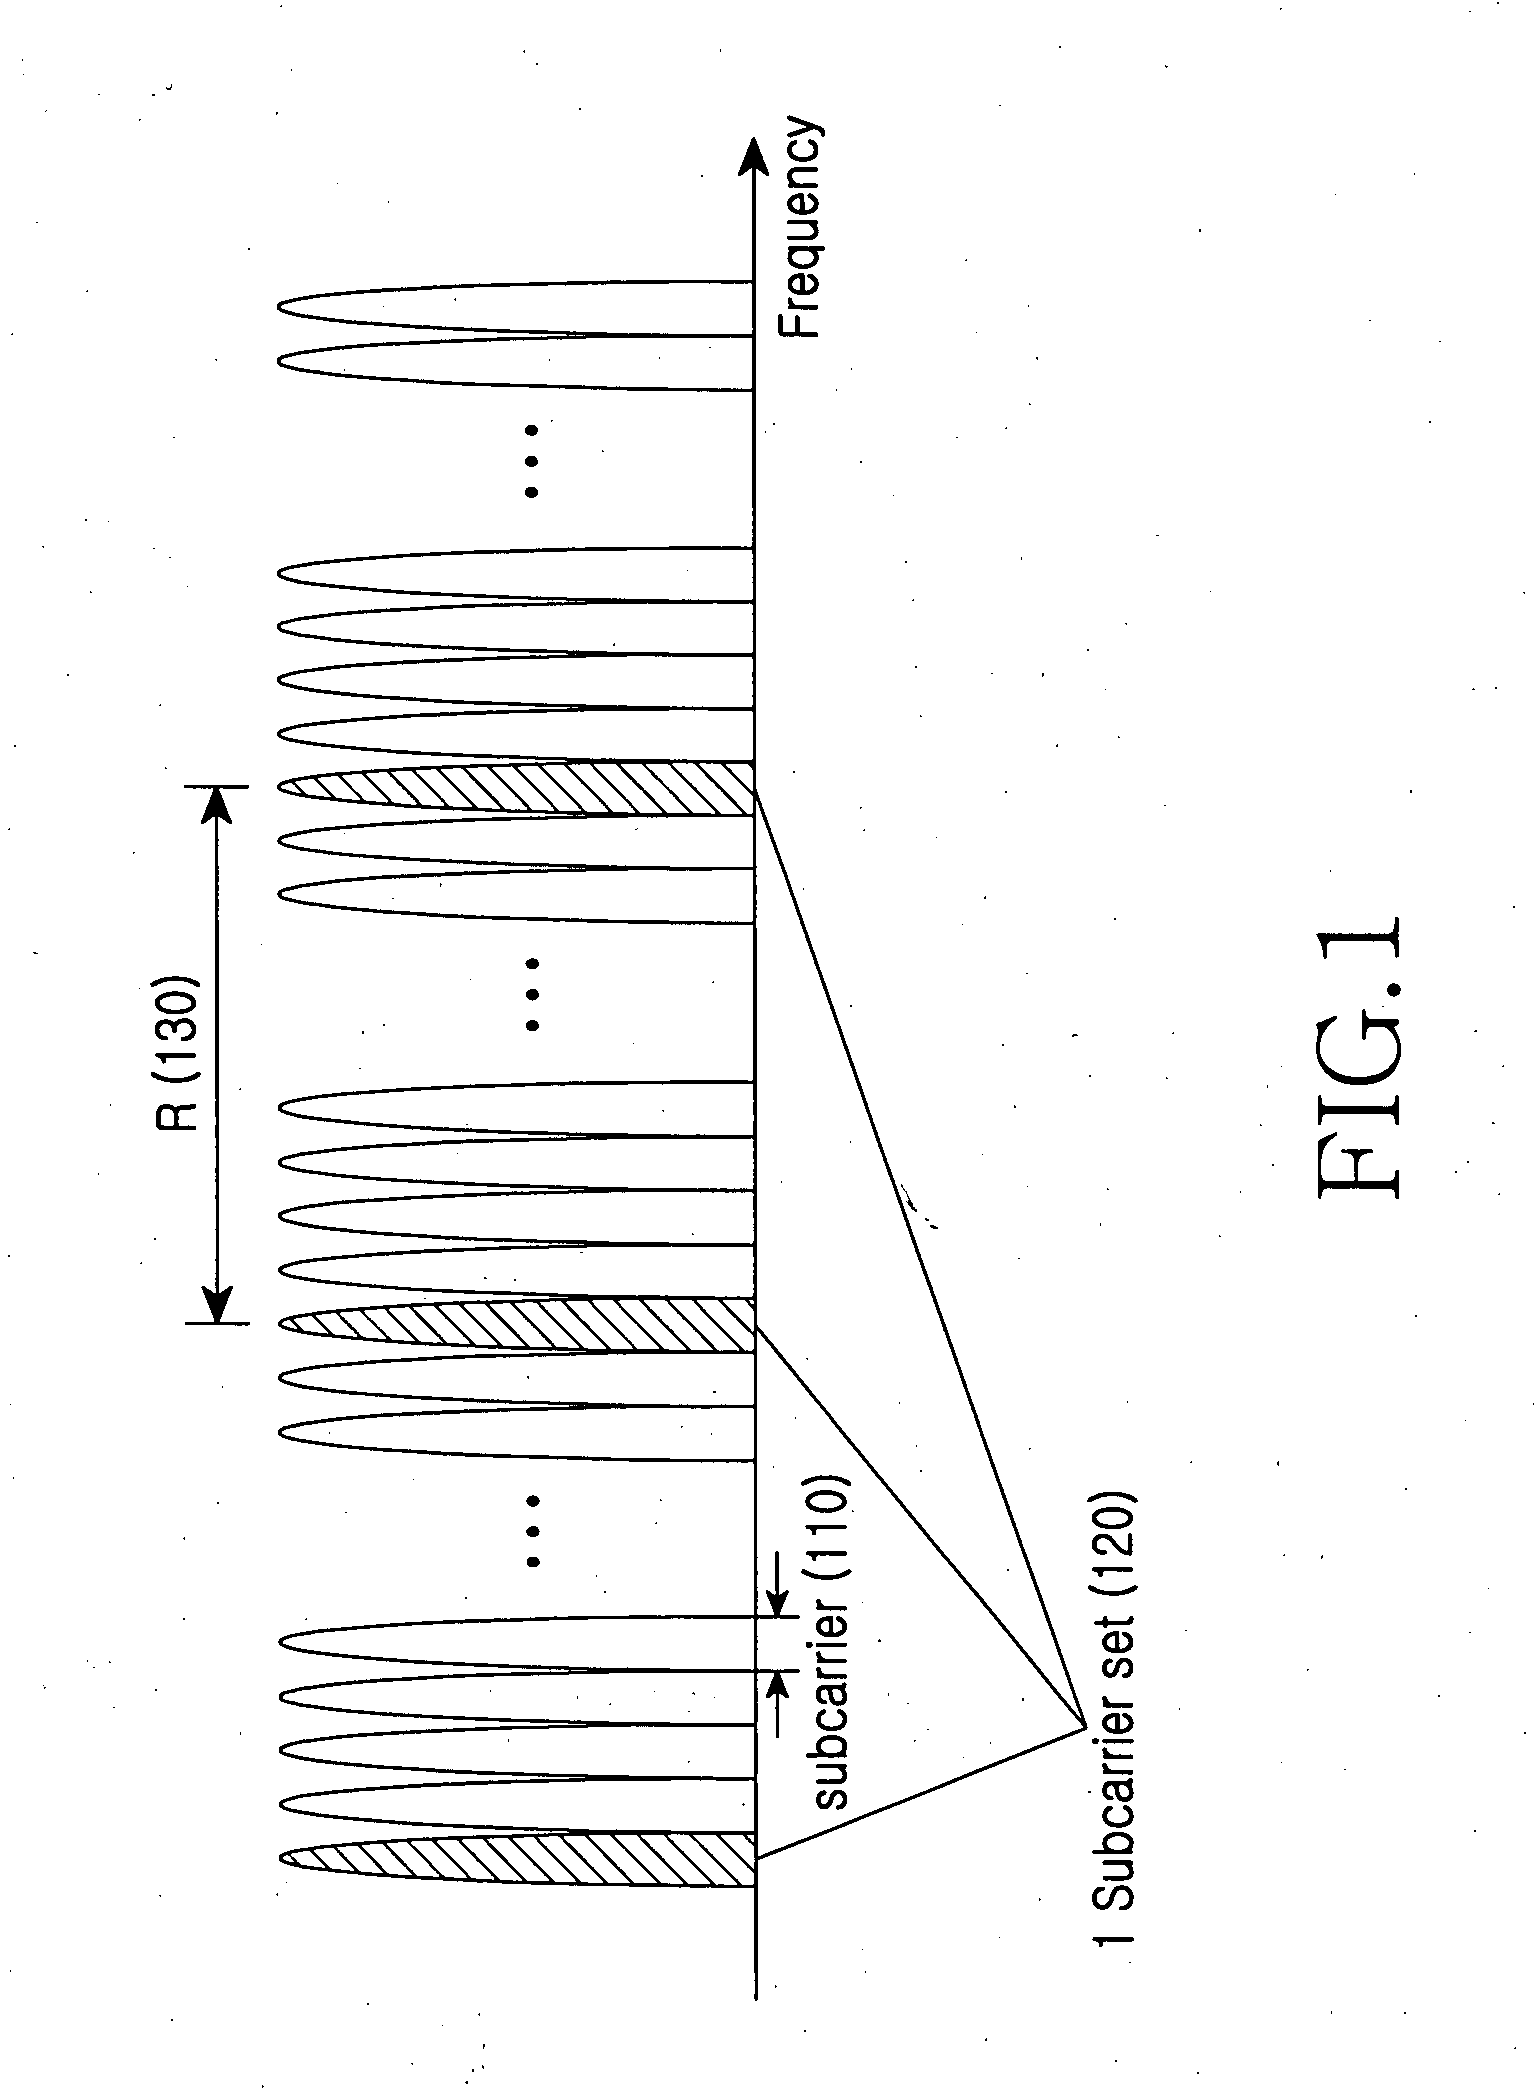 Apparatus and method for allocating resources and performing communication in a wireless communication system